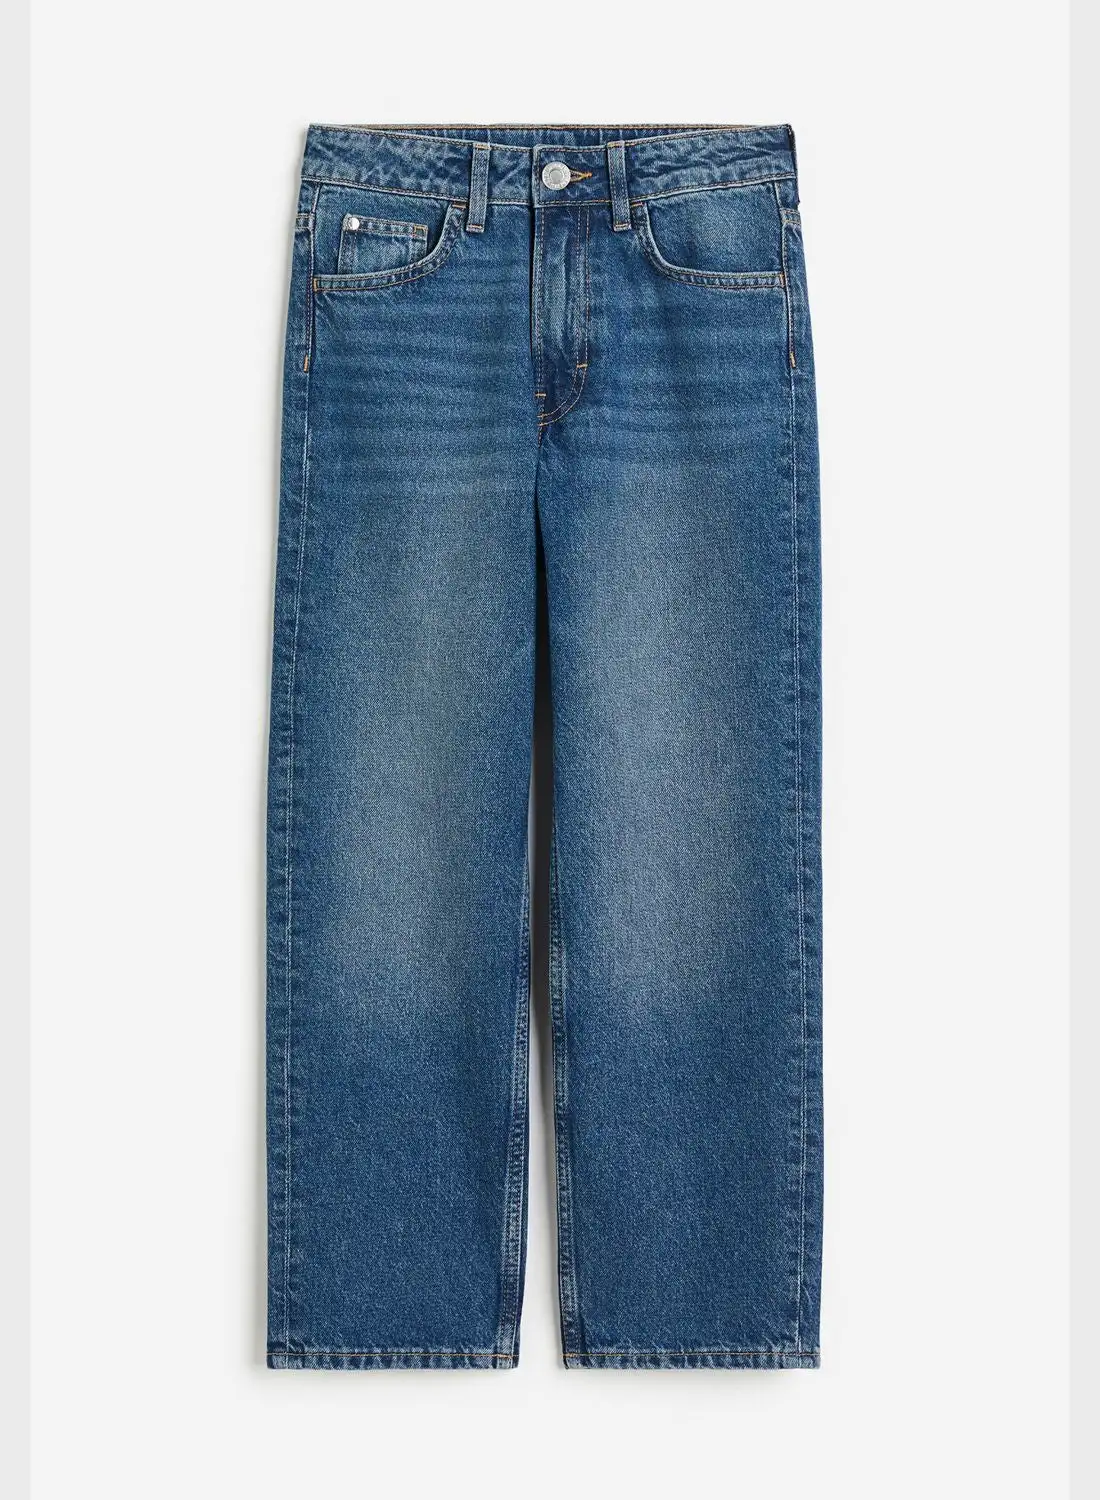 H&M Youth Denim Loose Fit Jeans